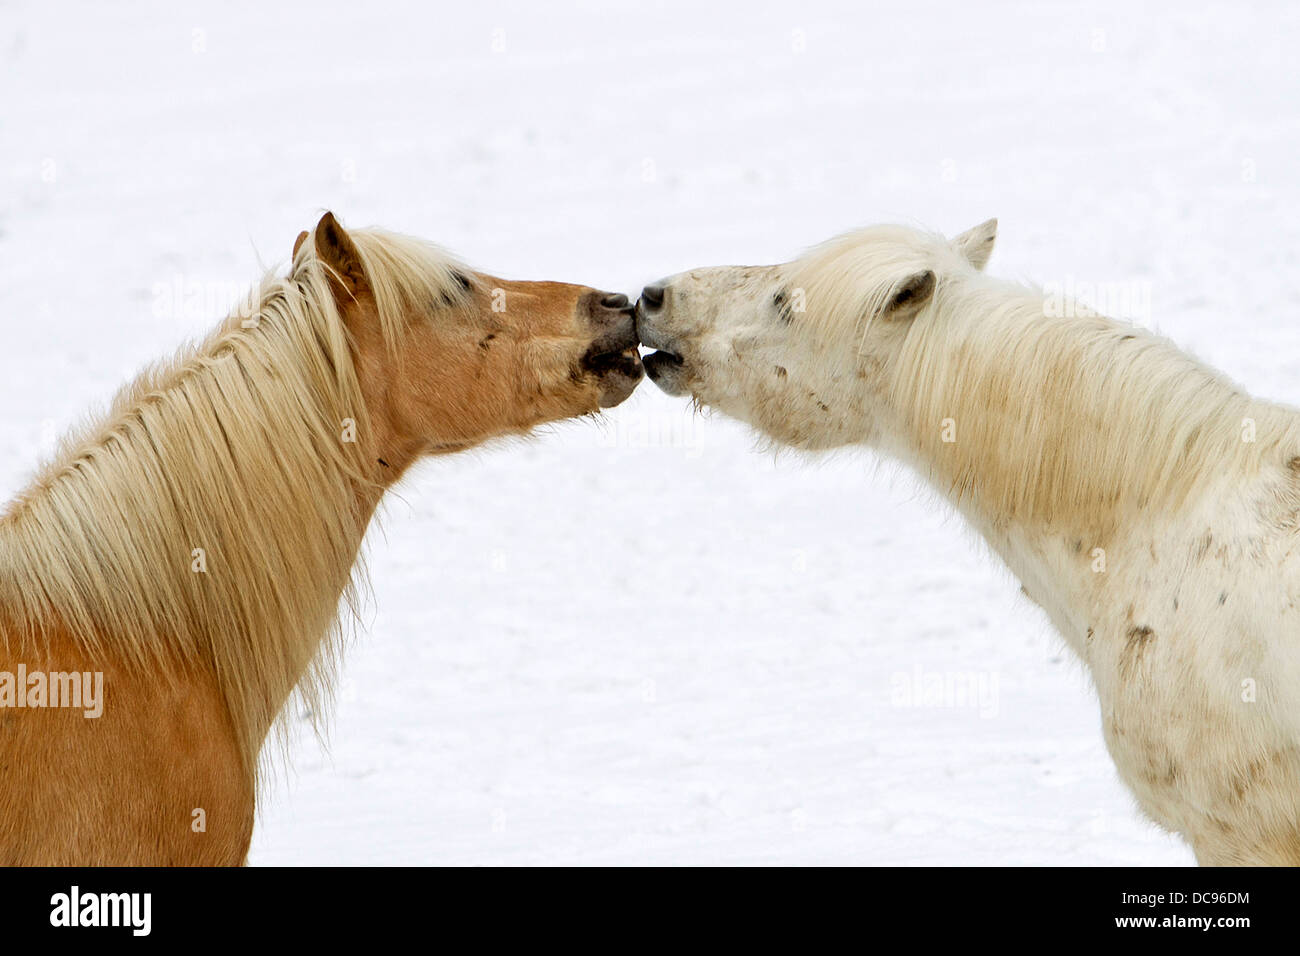 German Riding Pony. Two horses playing on a snowy pasture Stock Photo